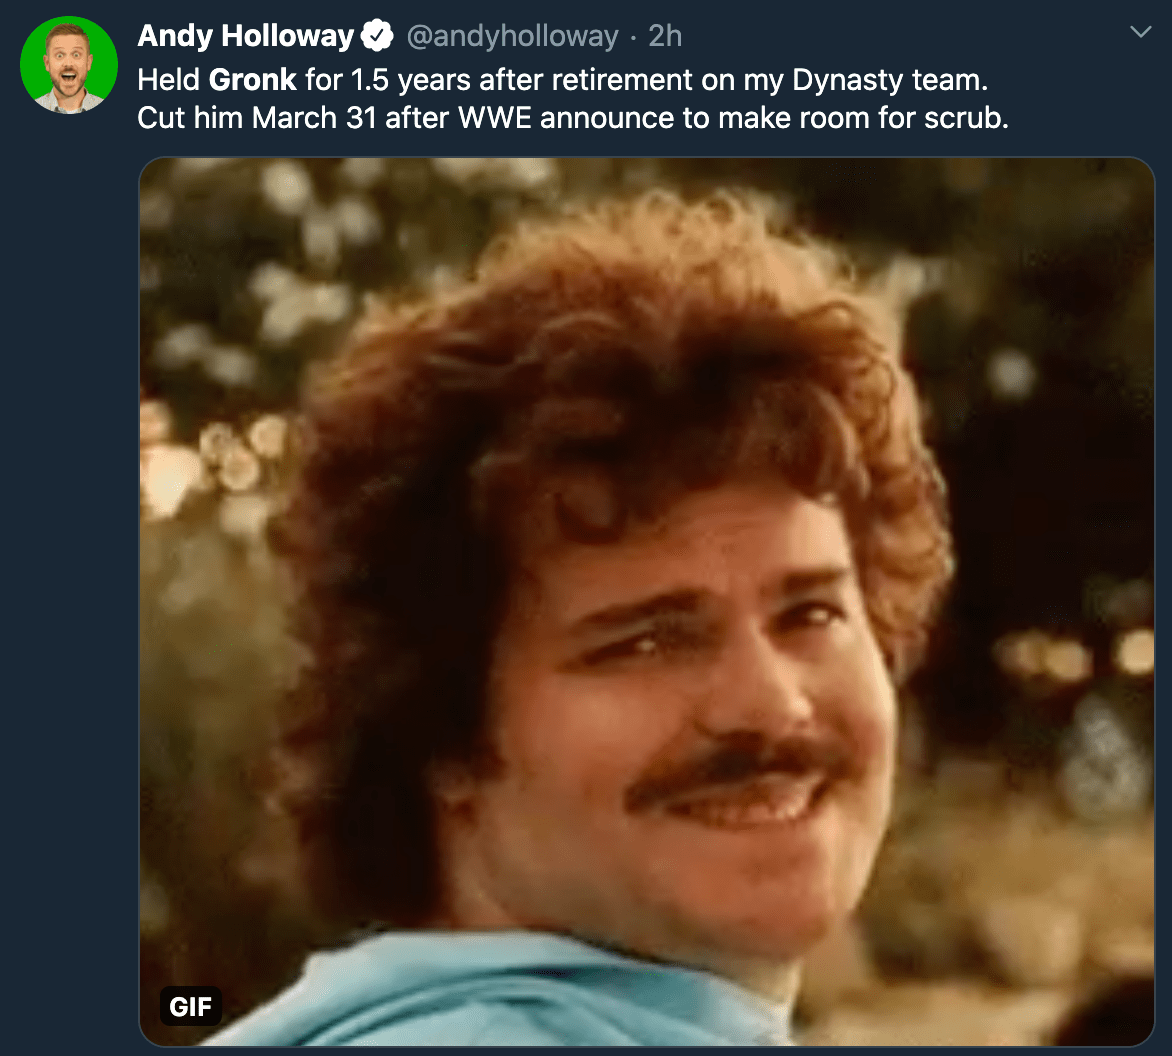 gronk meme - nacho libre smile - Andy Holloway 2h Held Gronk for 1.5 years after retirement on my Dynasty team. Cut him March 31 after Wwe announce to make room for scrub. Gif